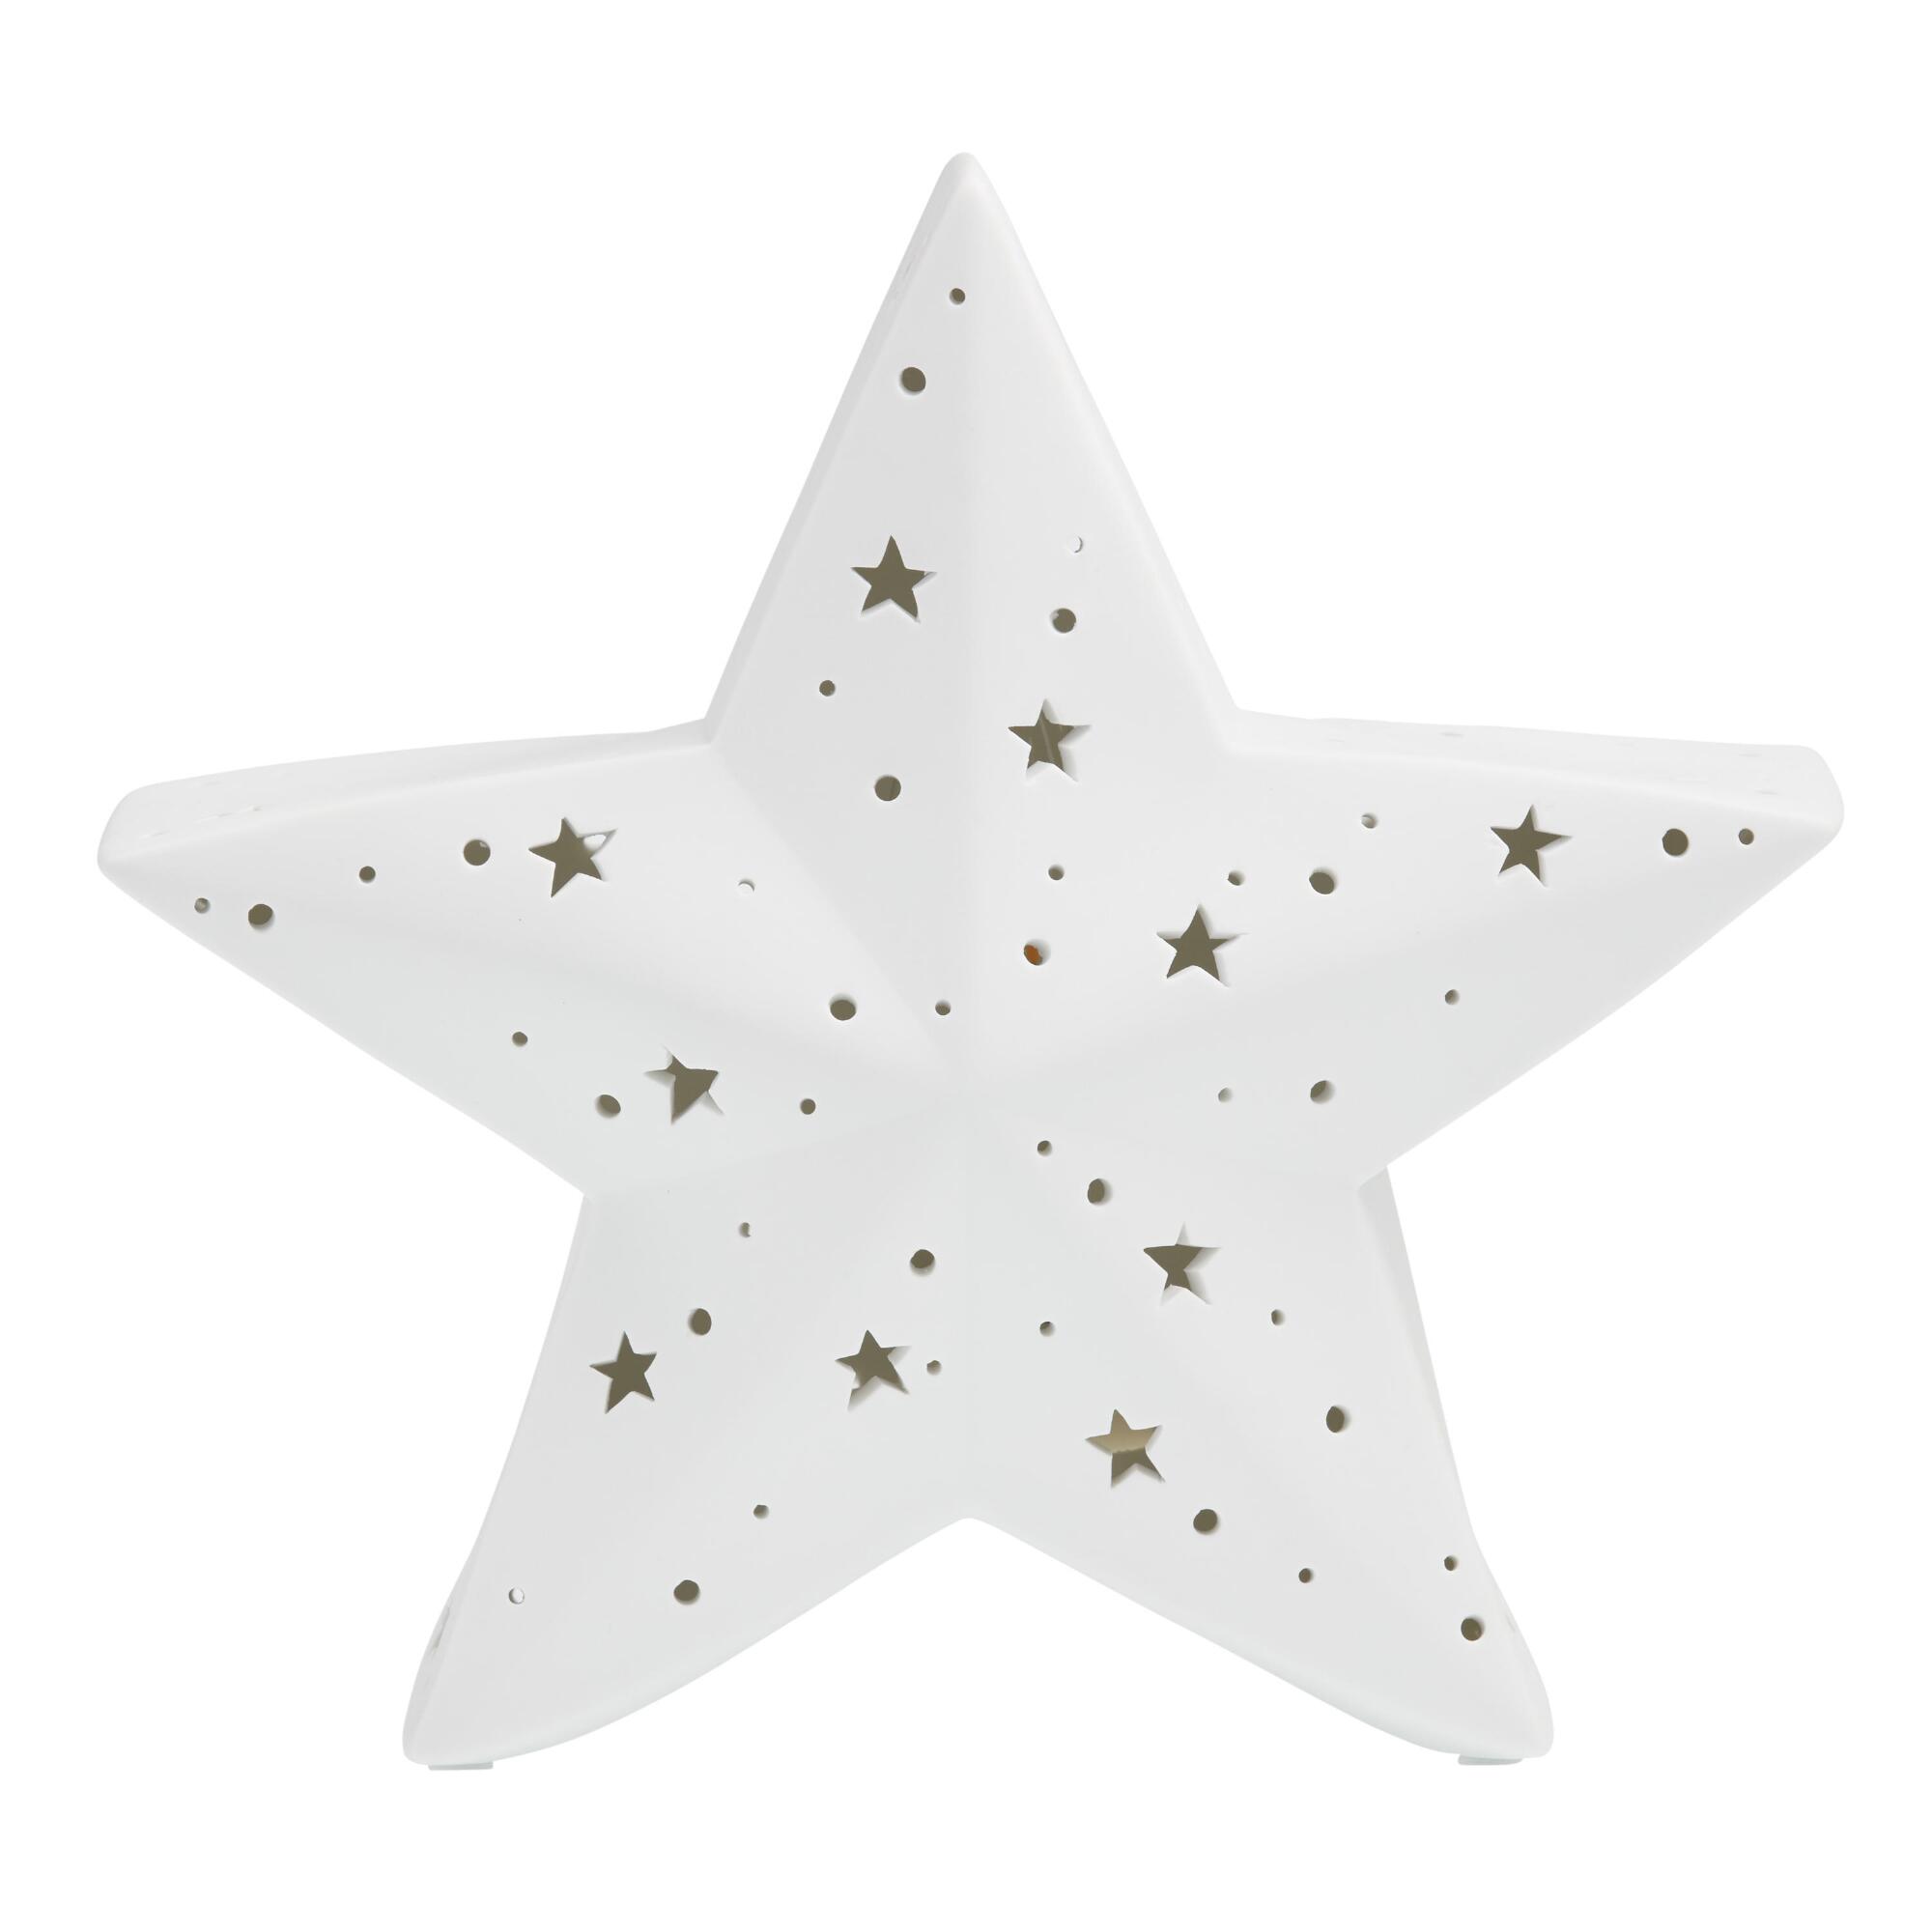 White Pierced Porcelain Star Accent Lamp - Ceramic - Small by World Market